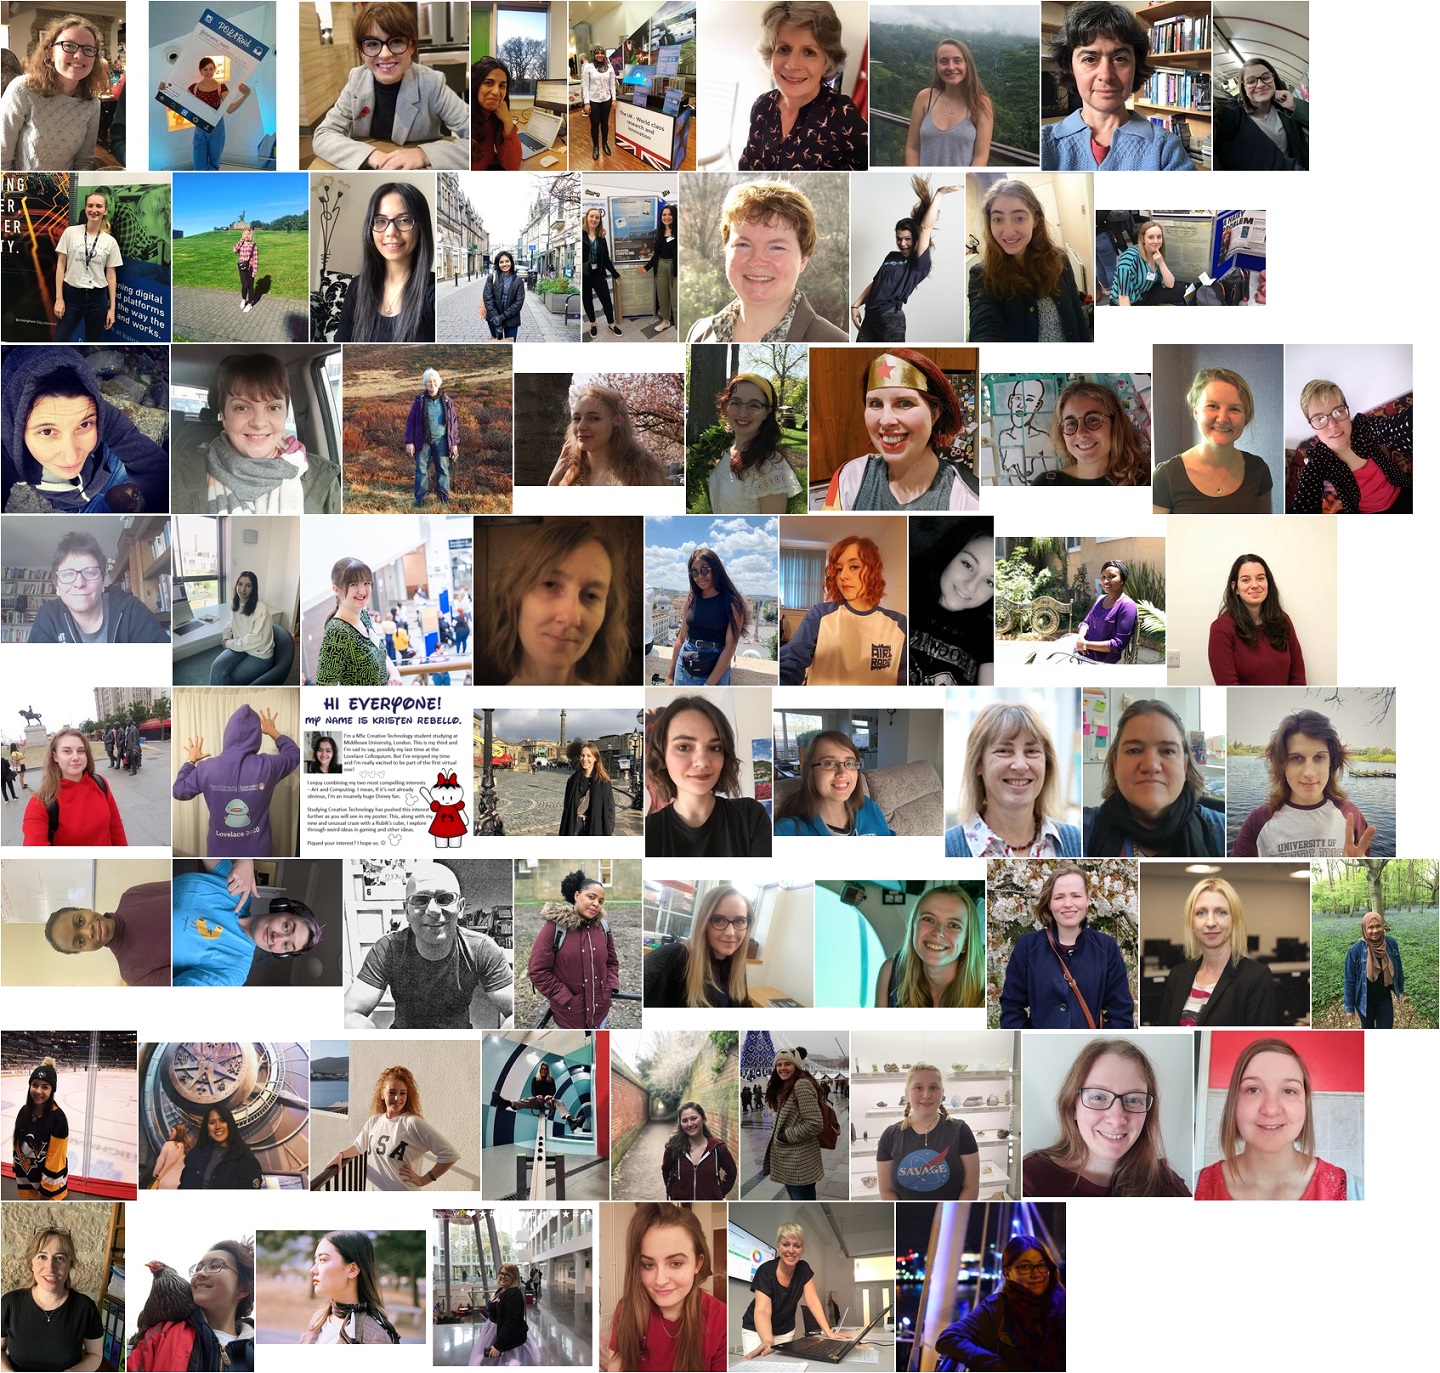 A selection of conference attendees at the virtual BCS Lovelace Colloquium 2020